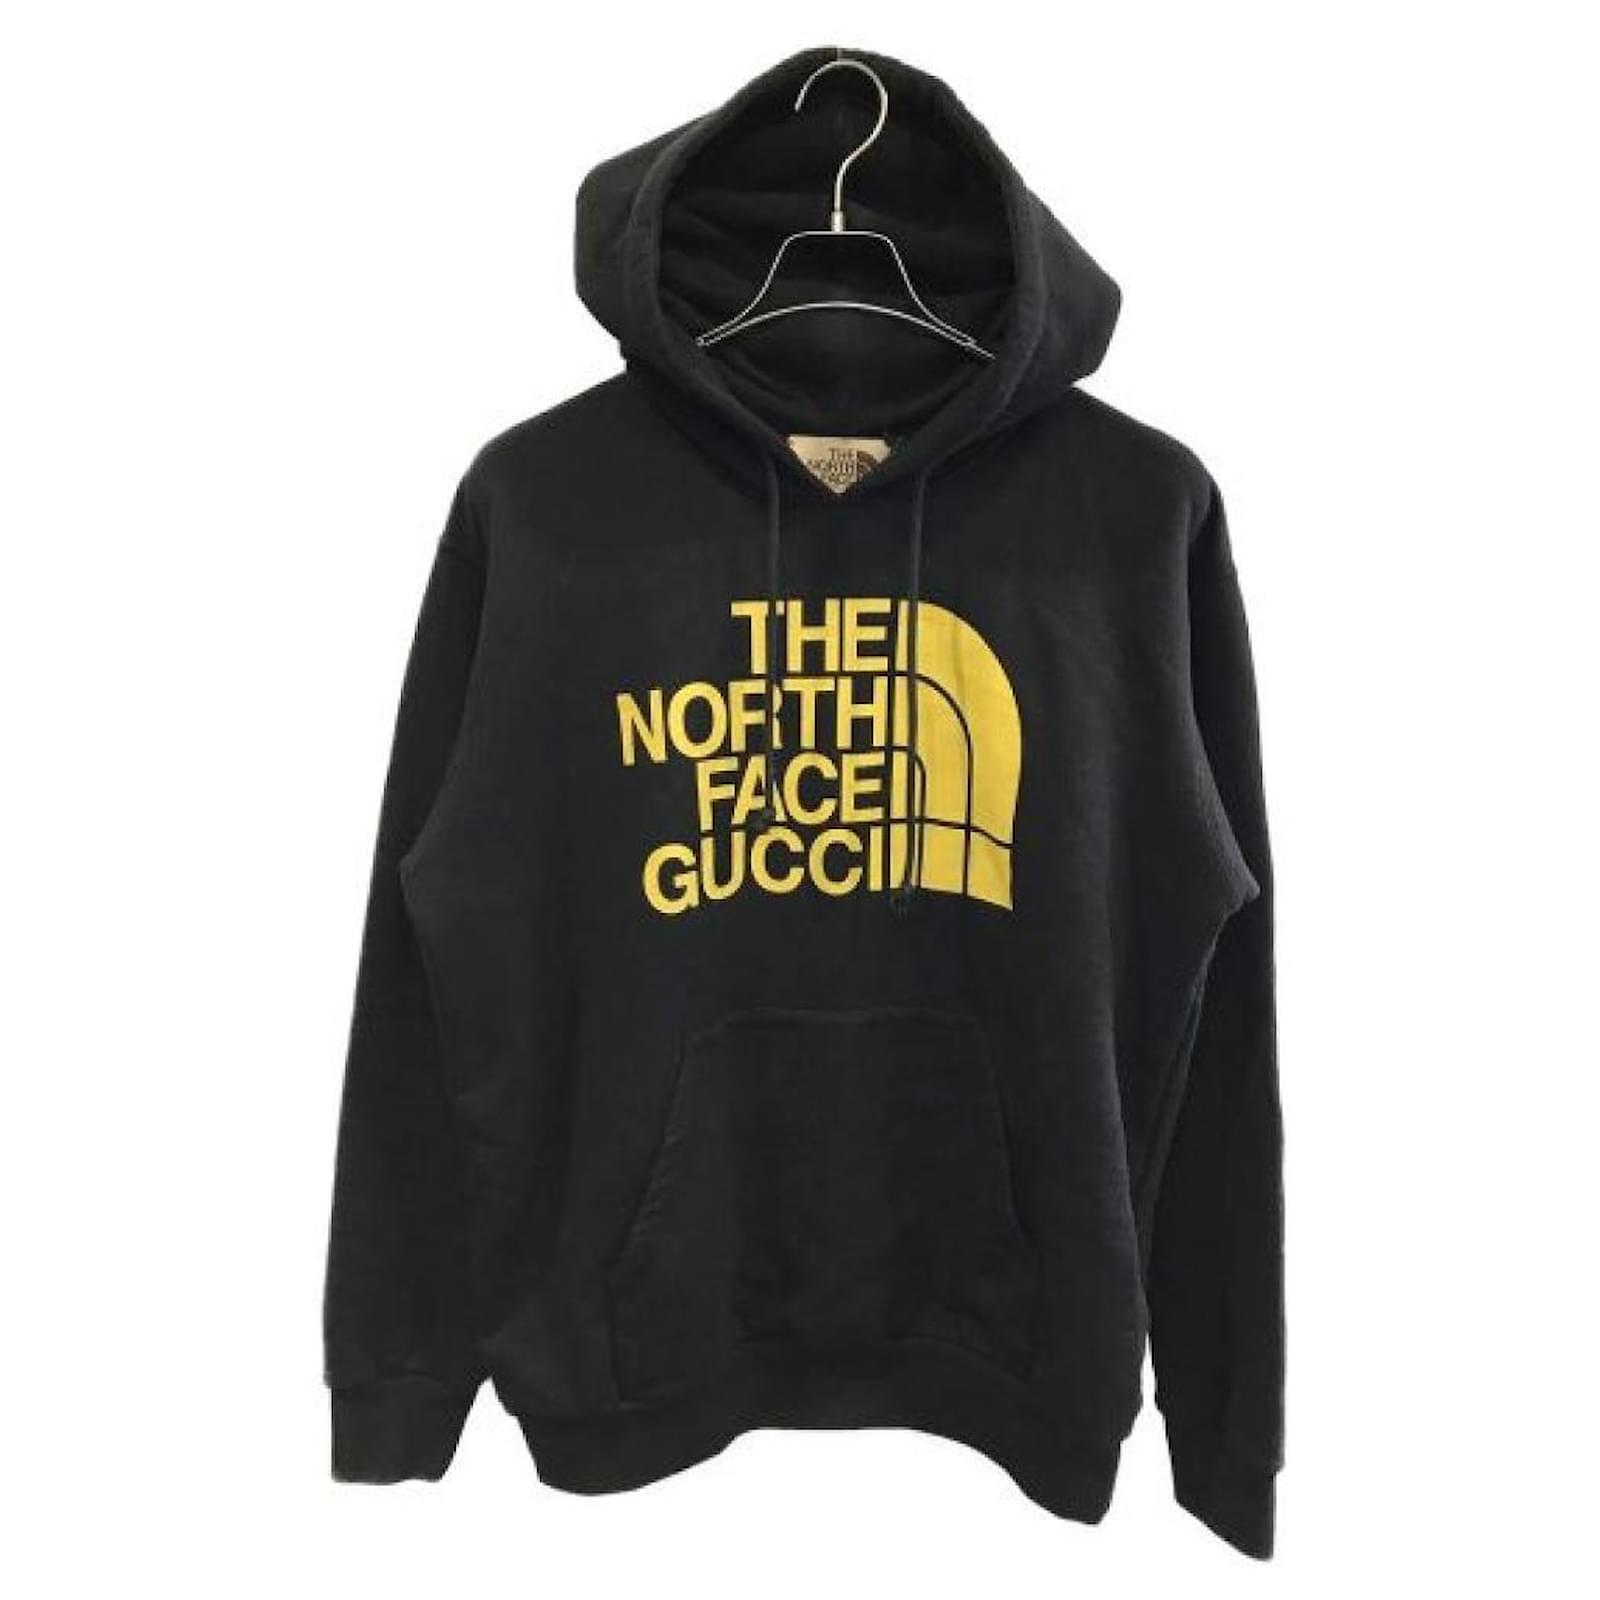 the north face gucci hoodie